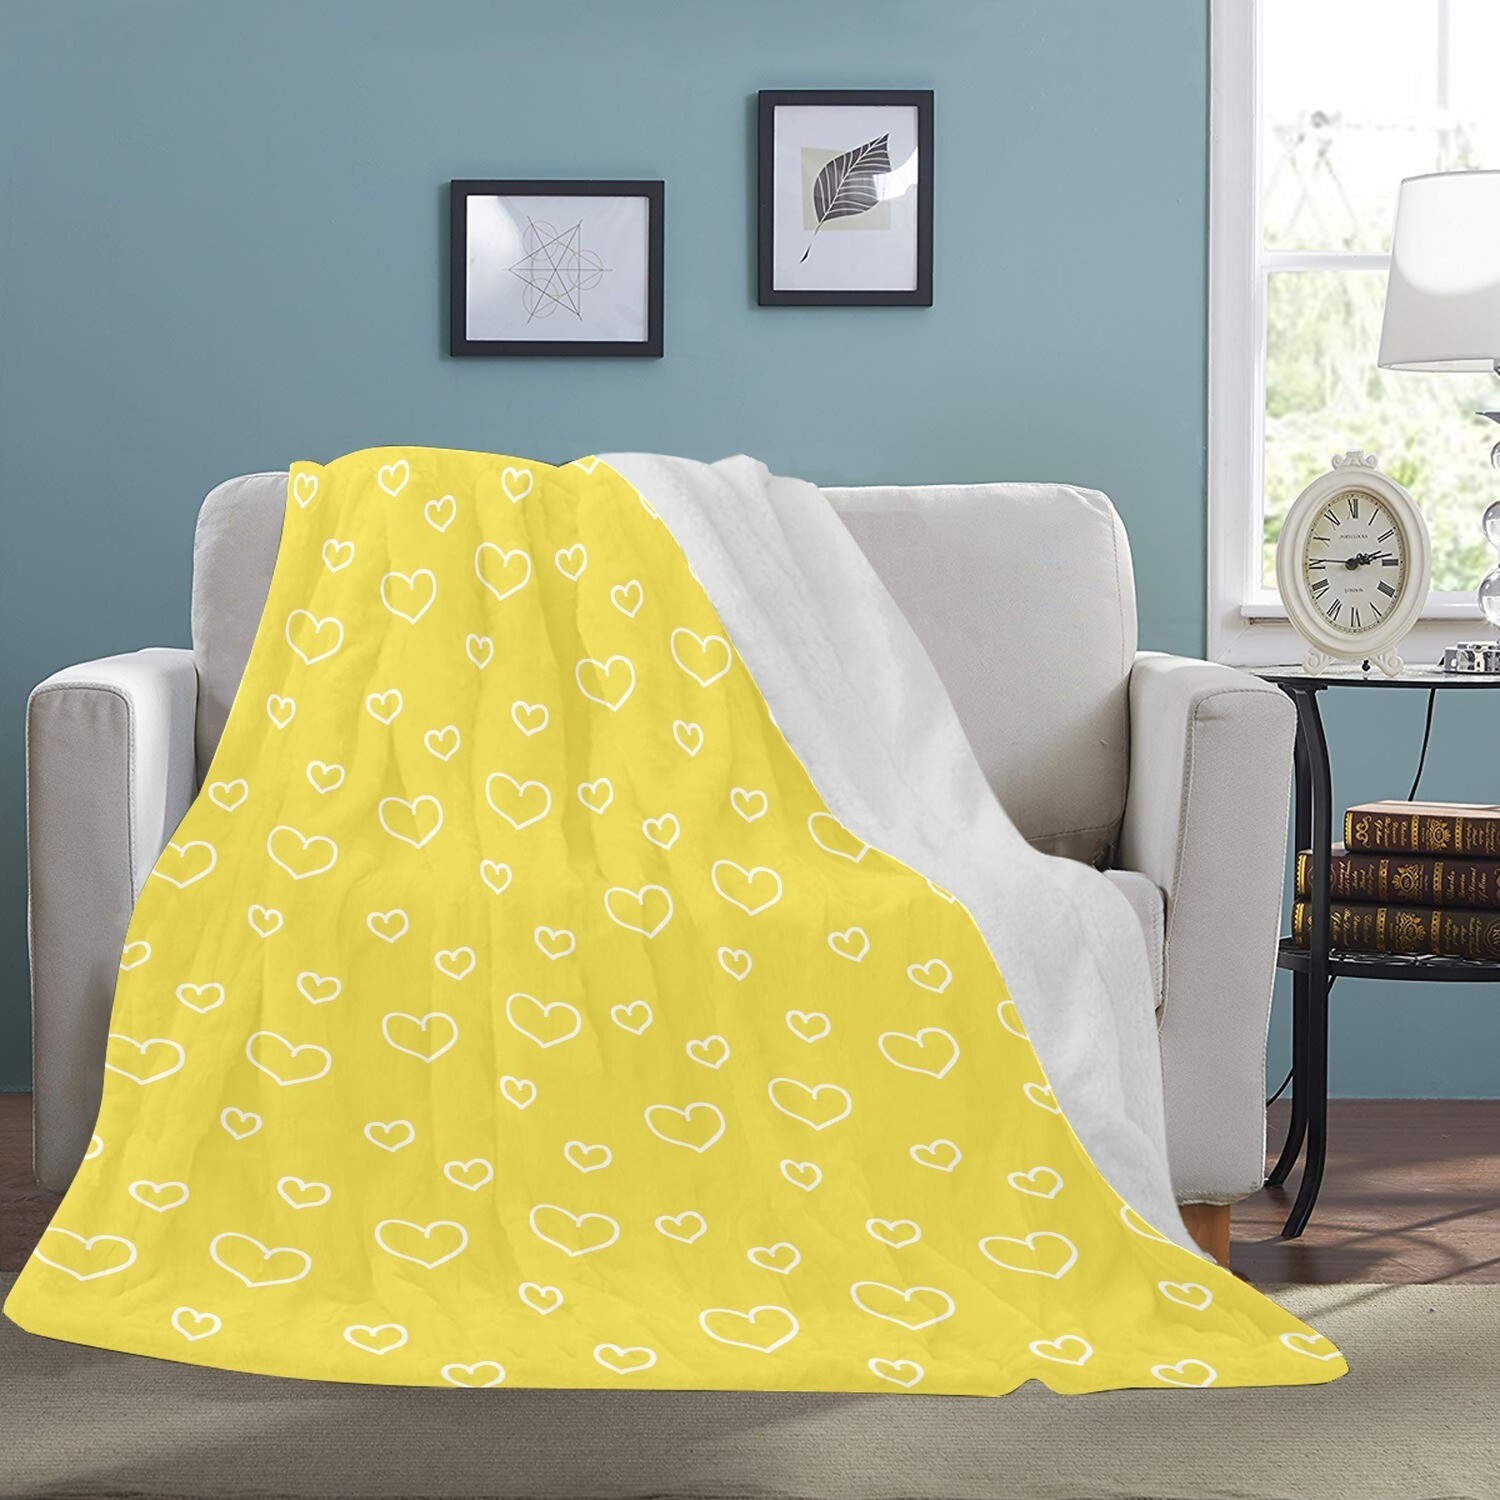 🤴🏽👸🏽💕Large Ultra-Soft Micro Fleece Blanket Valentine white outline hearts on yellow illuminating, gift, gift for her, gift for him, gift for them, 70"x80"